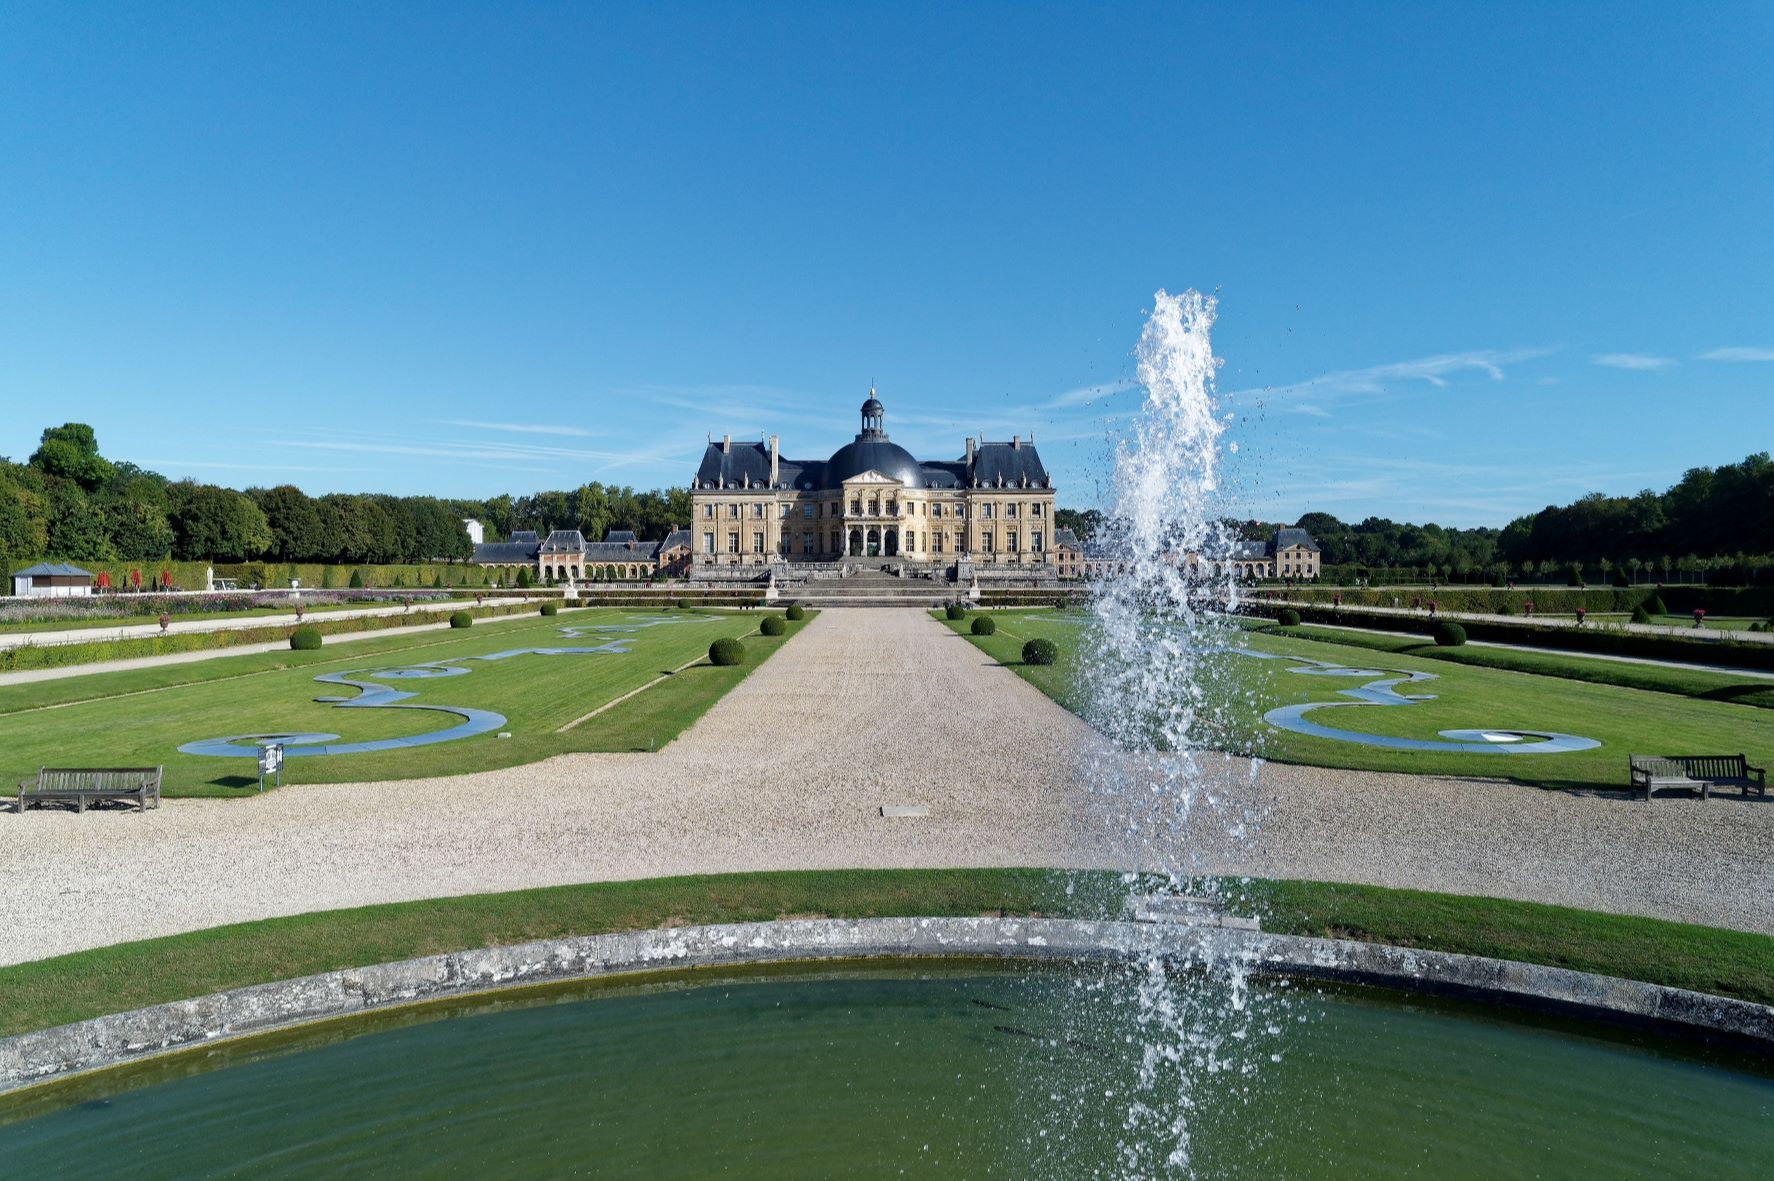 All day audio tour of Fontainebleau and Vaux le Vicomte, with transport from Paris